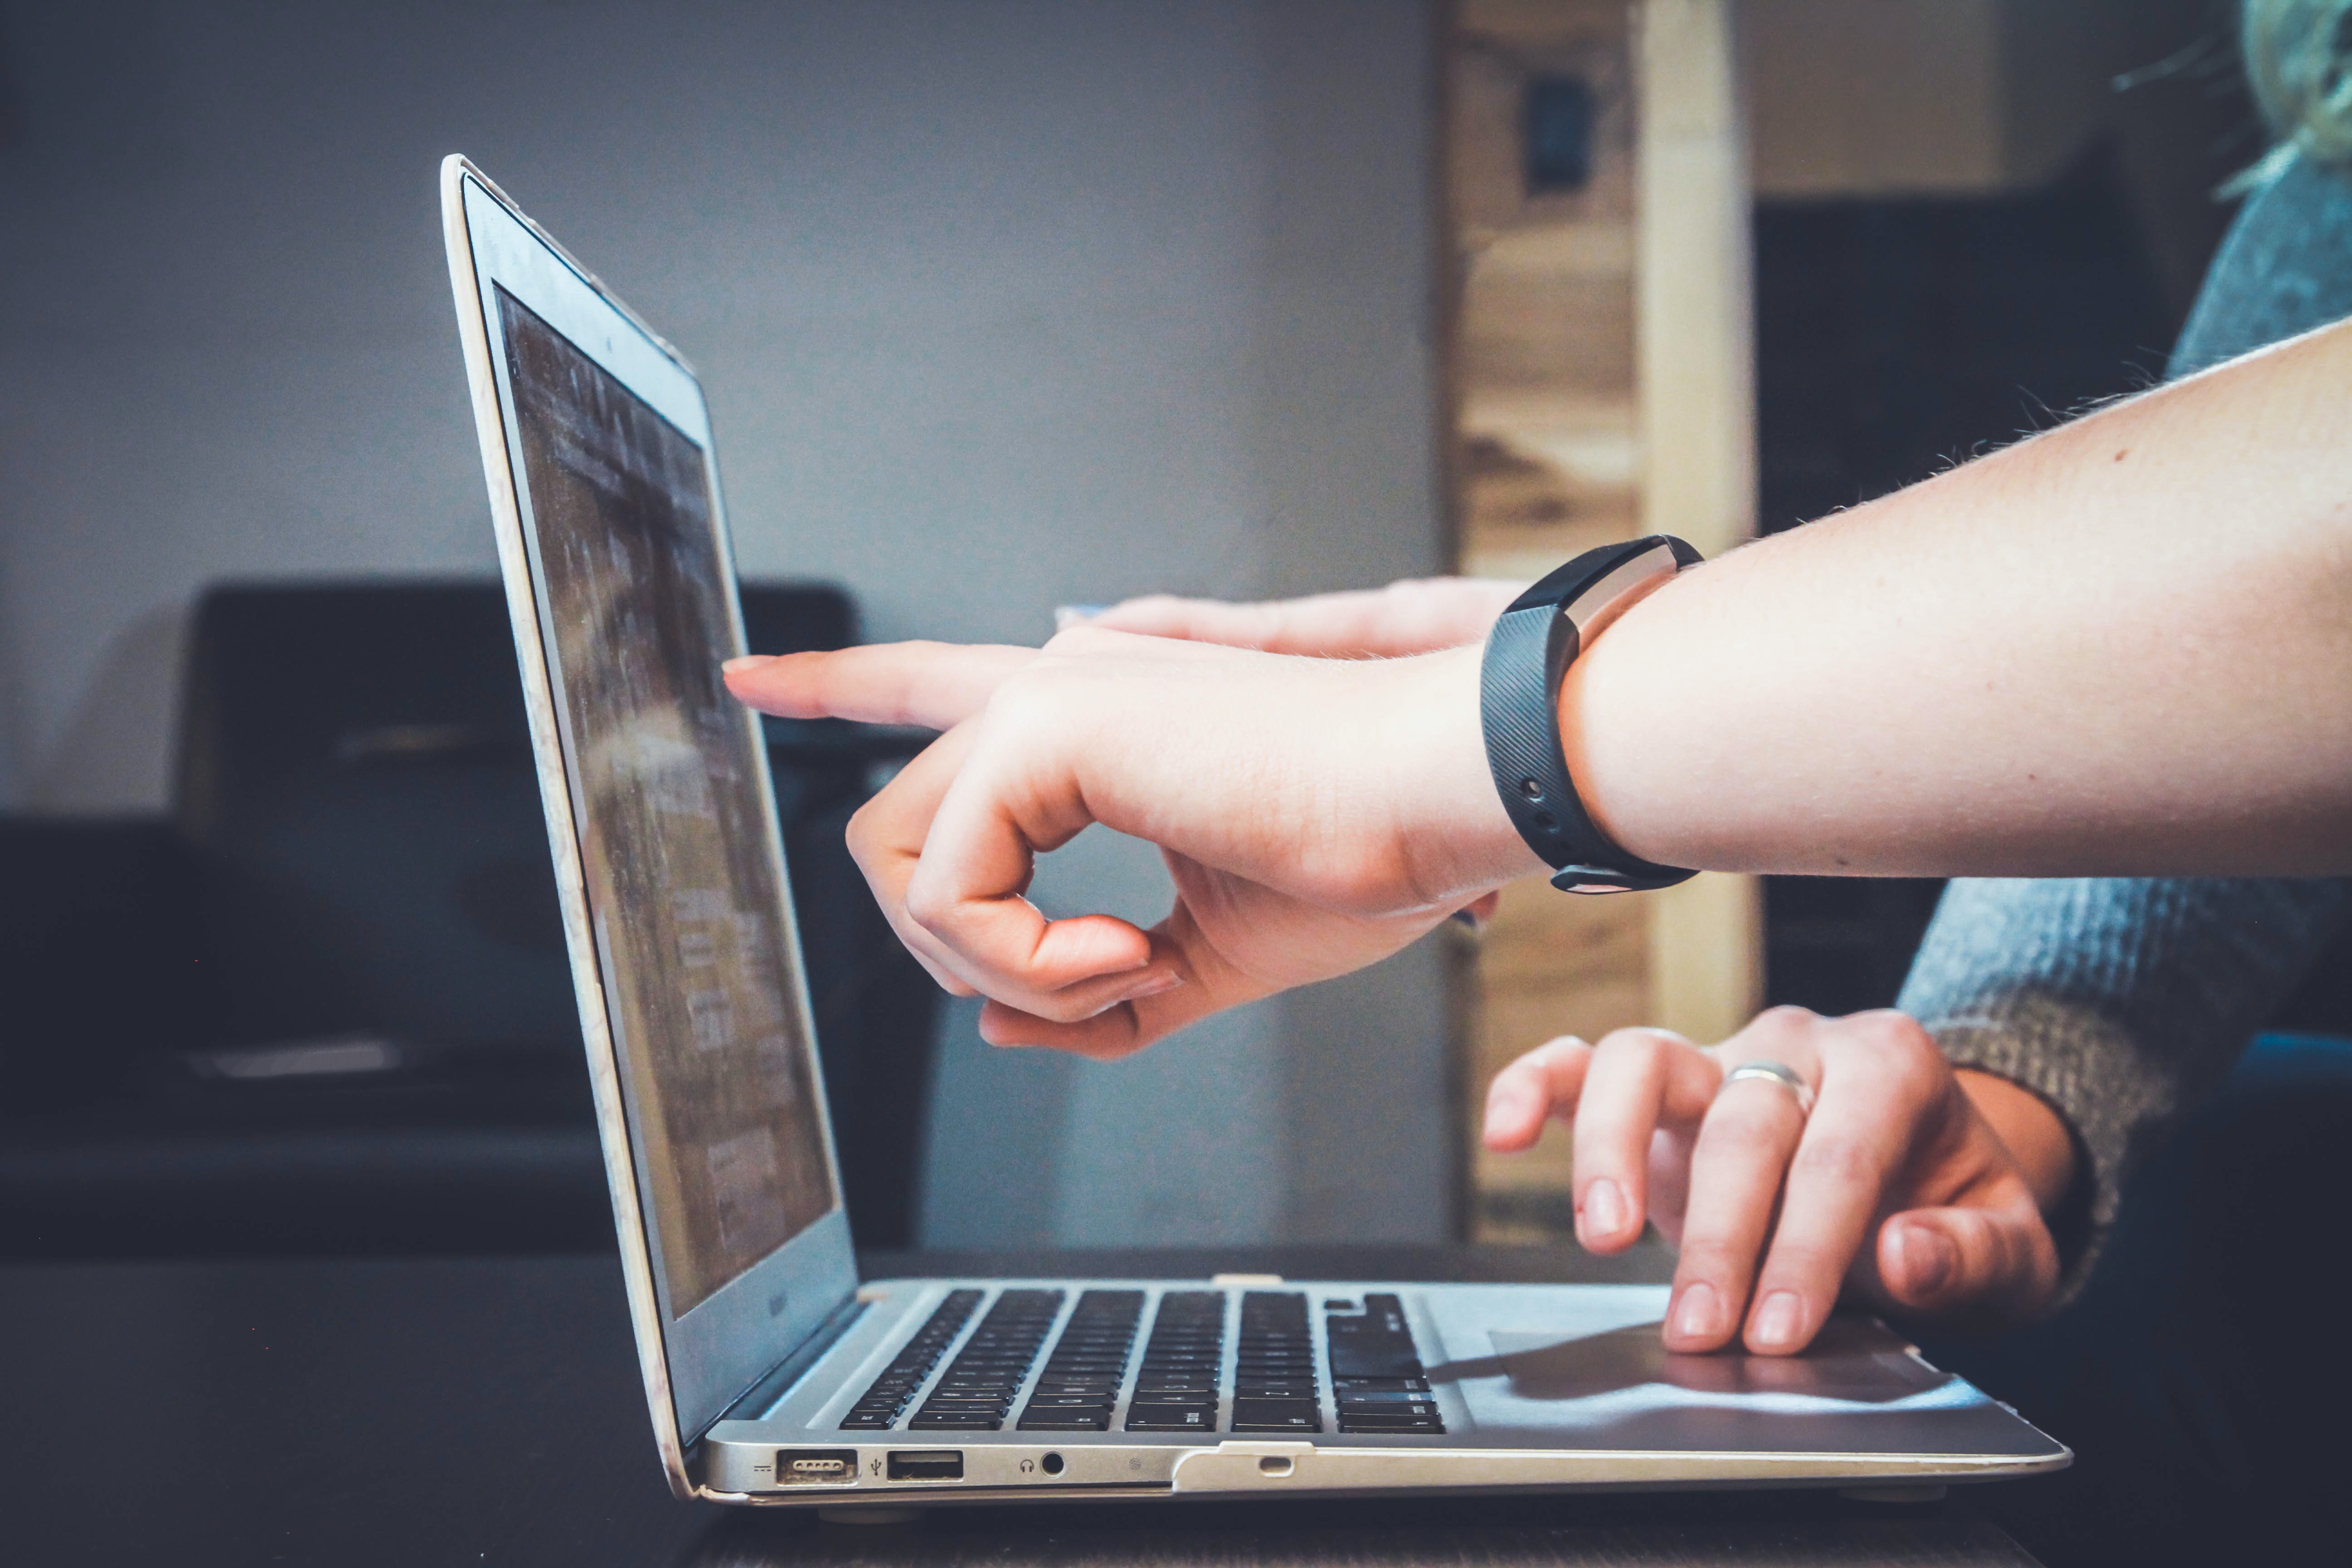 Image of laptop with woman's arm pointing to the screen. Man's hand on the mouse.